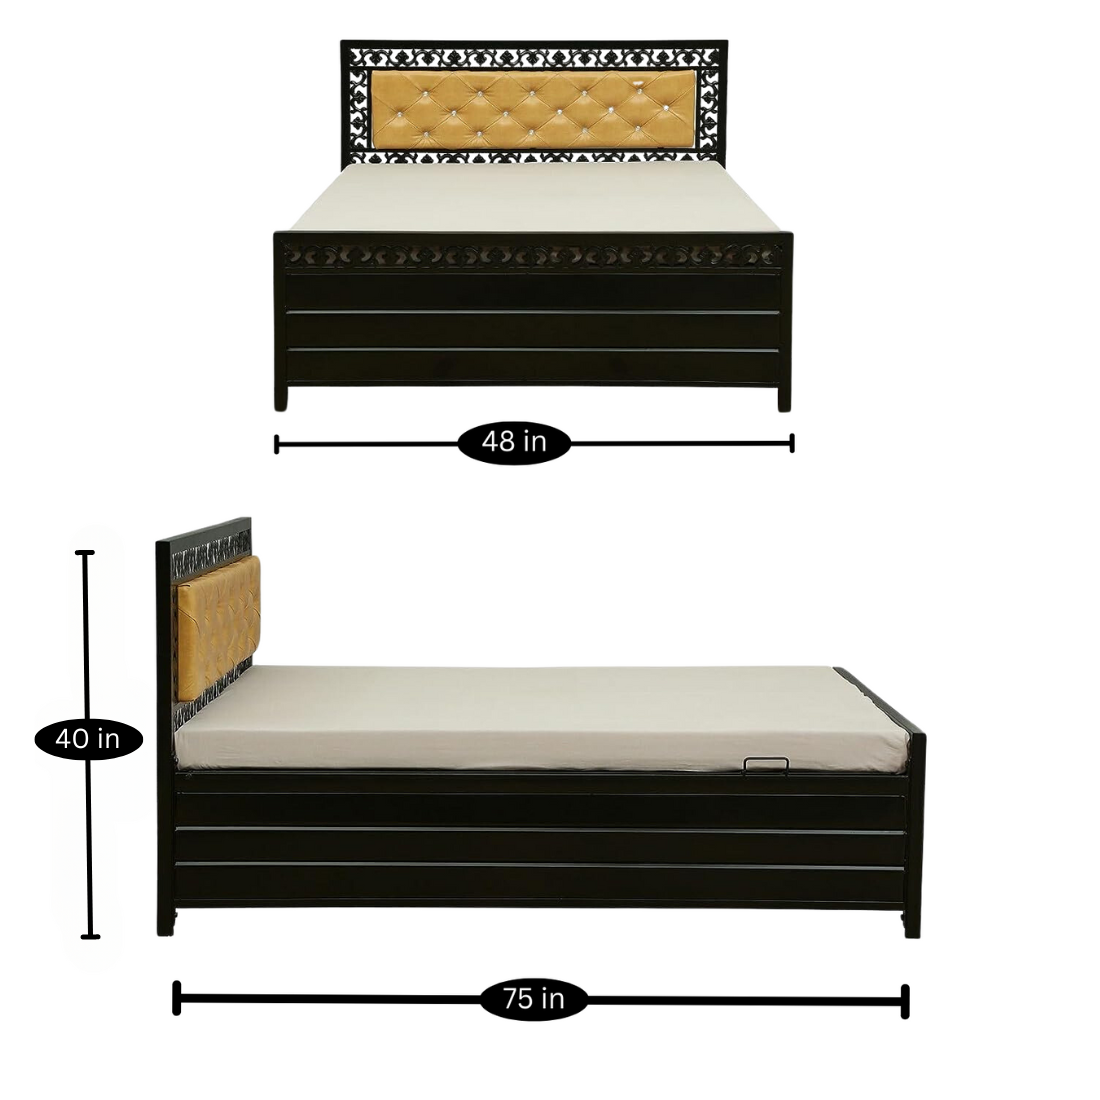 Cuba Hydraulic Storage Double Metal Bed with Golden Cushion Headrest (Color - Black)